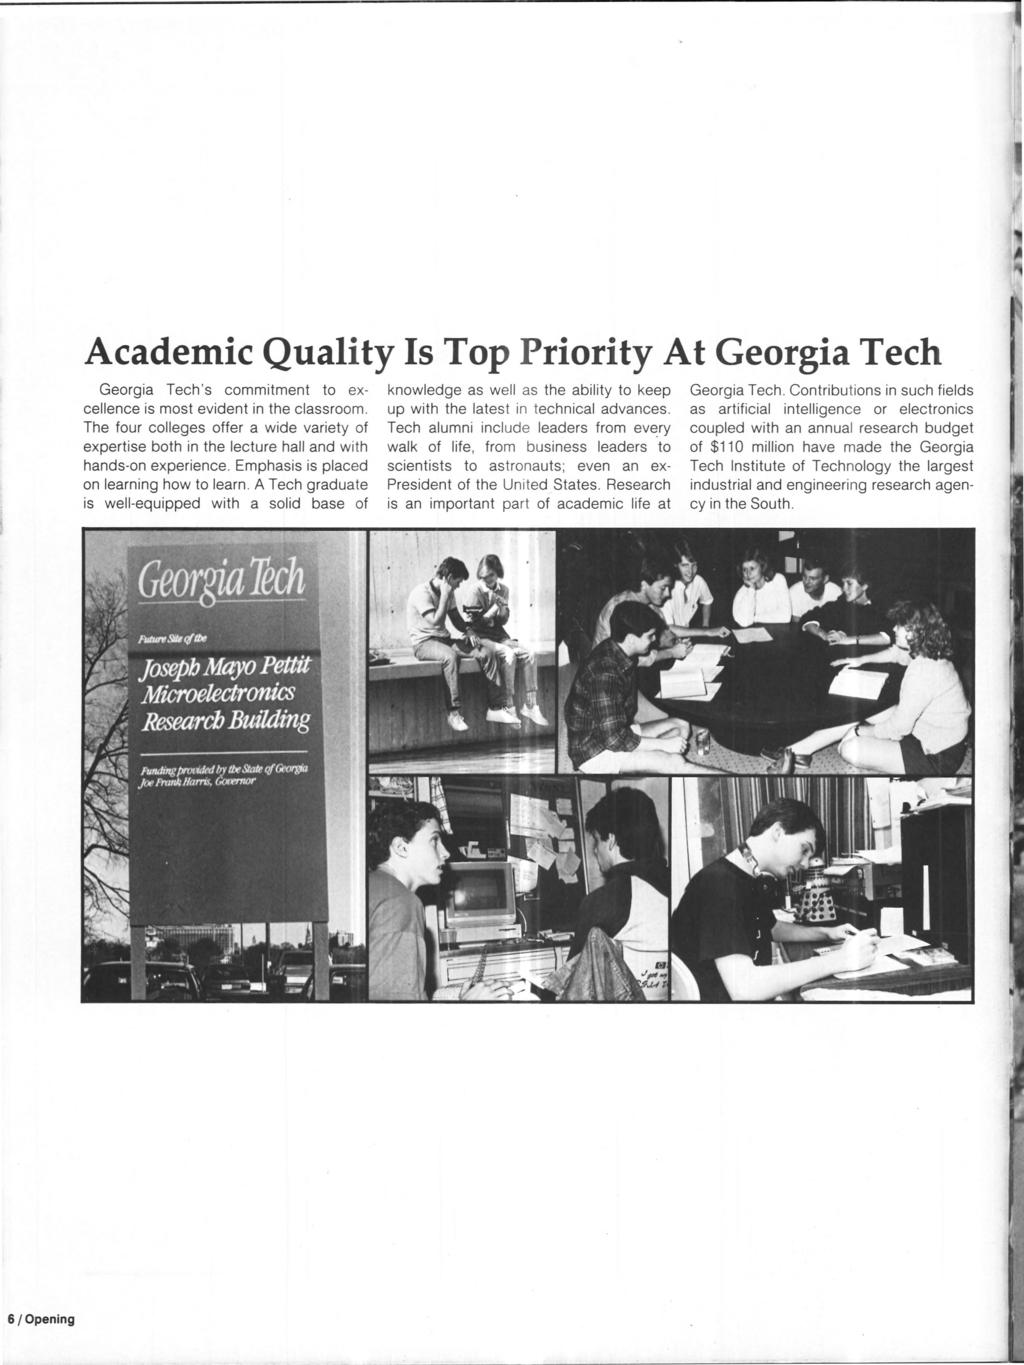 Academic Quality Is Top Priority At Georgia Tech Georgia Tech's commitment to excellence is most evident in the classroom.